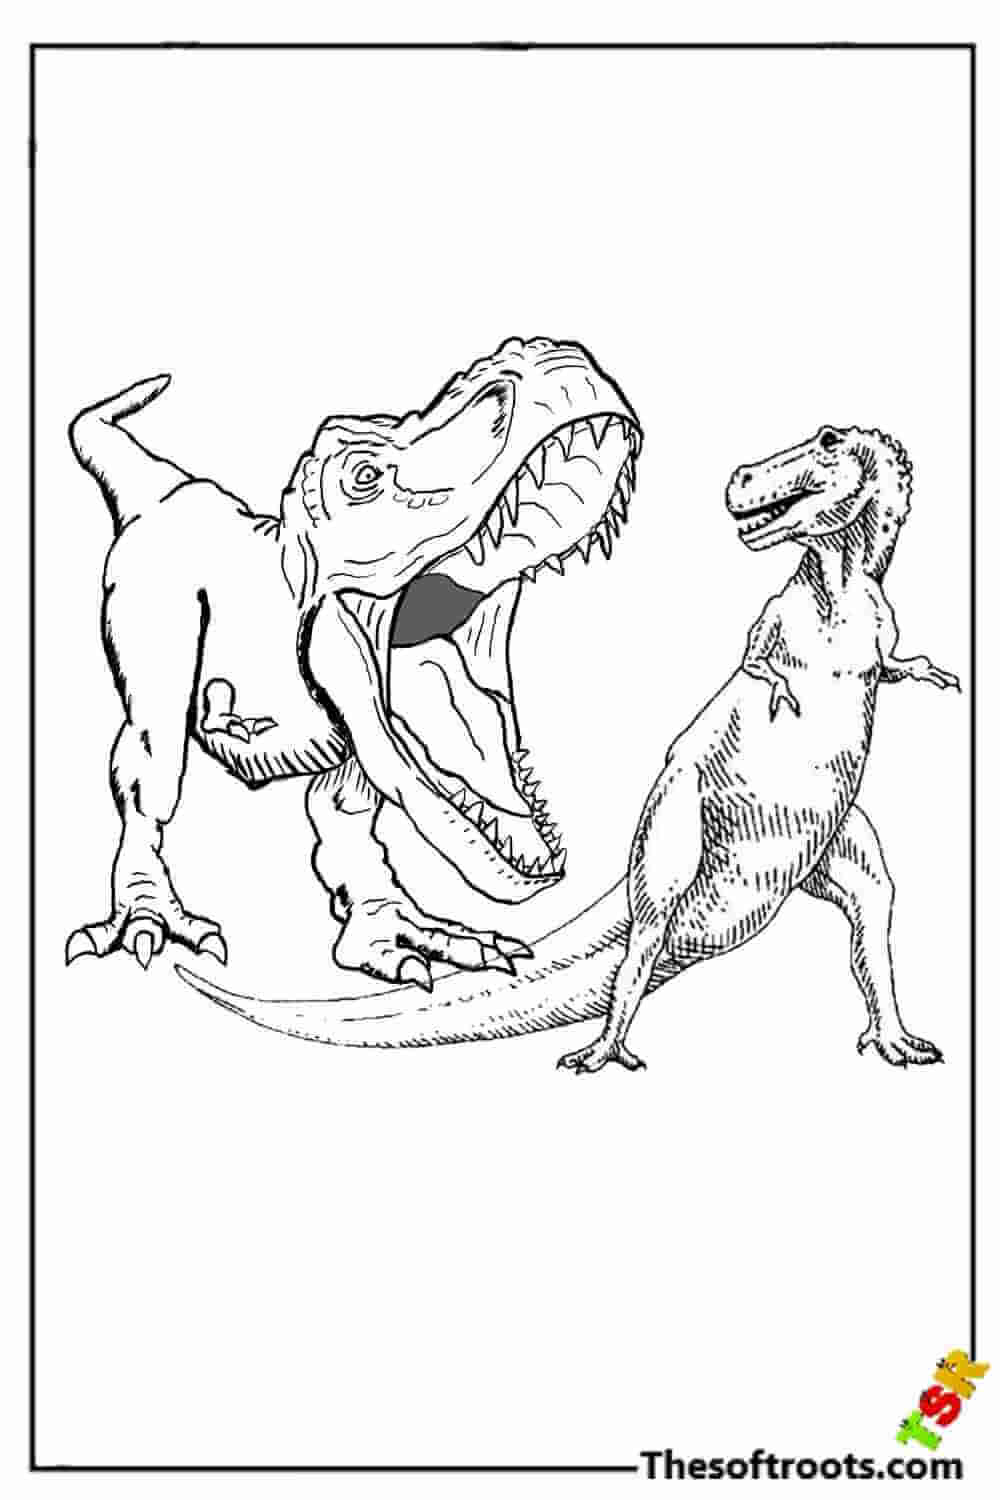 T-Rex and Trachodon coloring pages